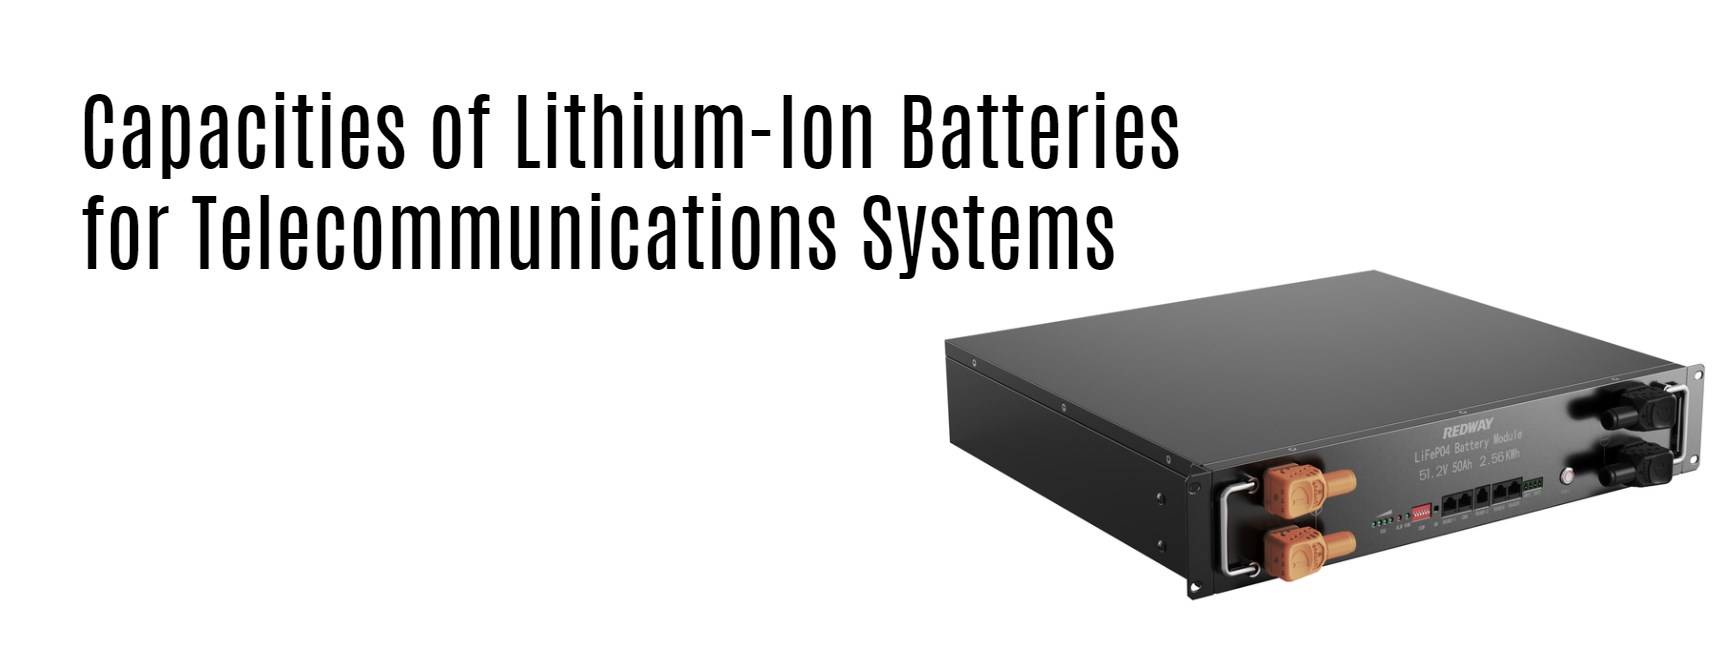 Capacities of Lithium-Ion Batteries for Telecommunications Systems. 48v 50ah server rack battery 51.2v 50ah factory oem snmp